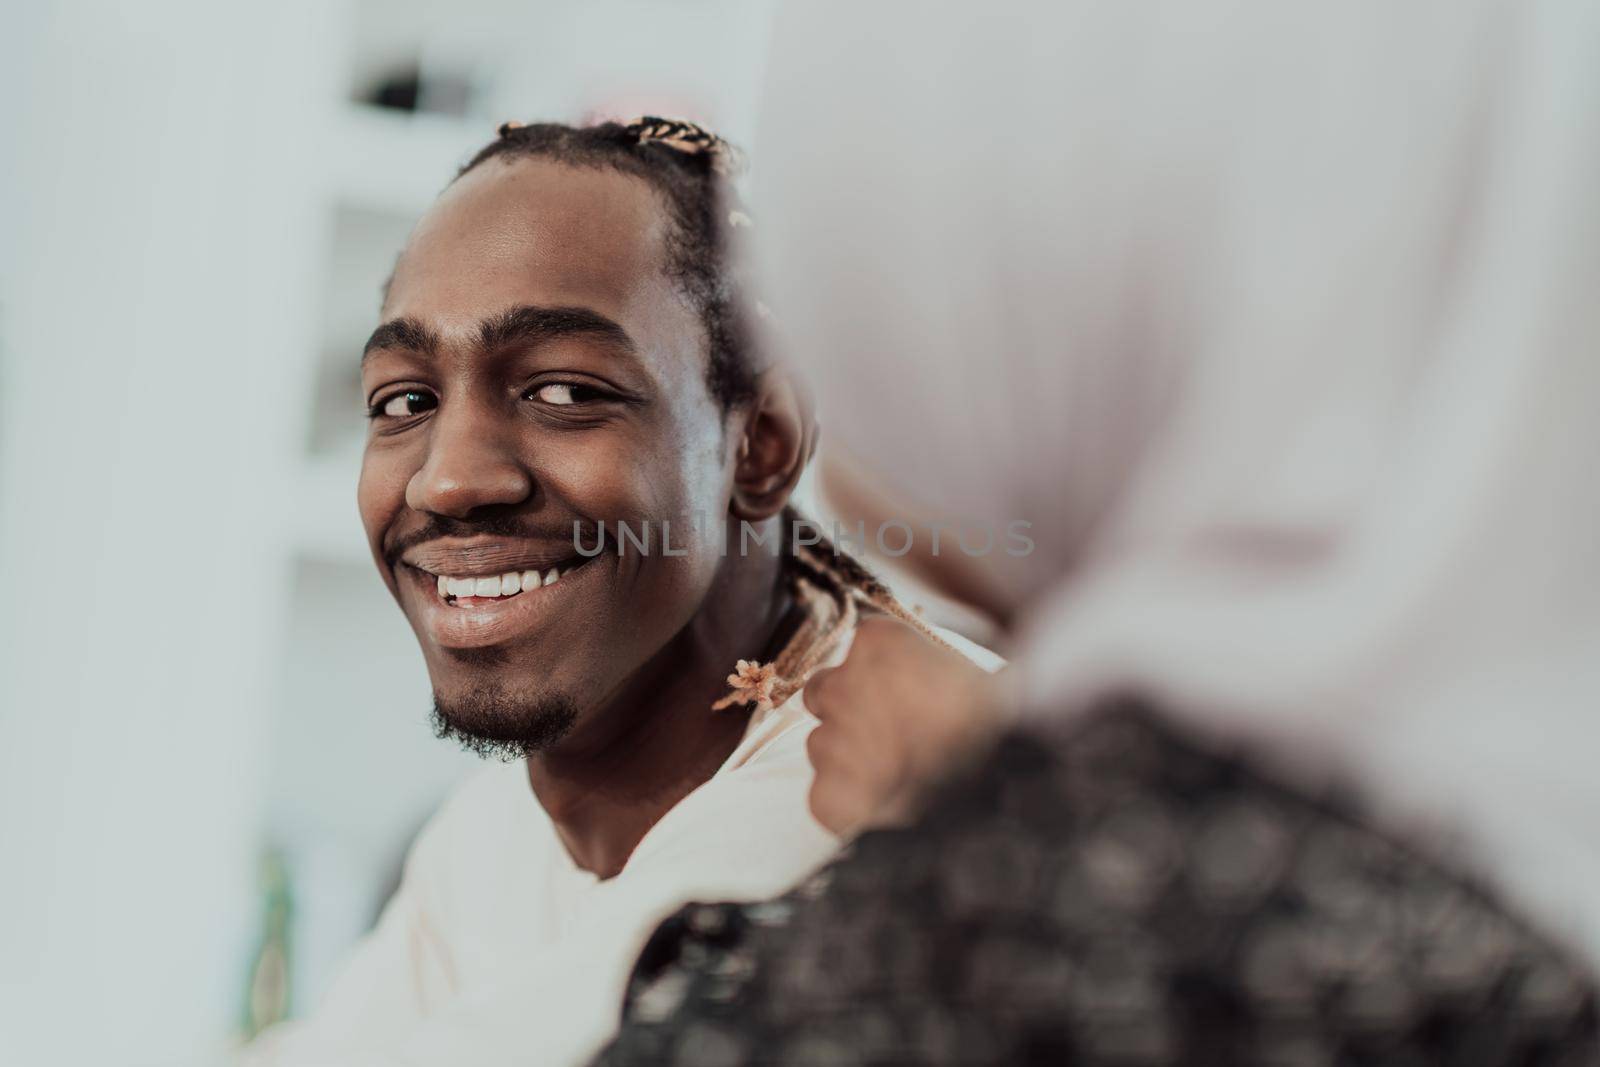 A young Muslim couple has a romantic time at home while the woman makes the hairstyle for her husband female wearing traditional Sudan Islamic hijab clothes. by dotshock